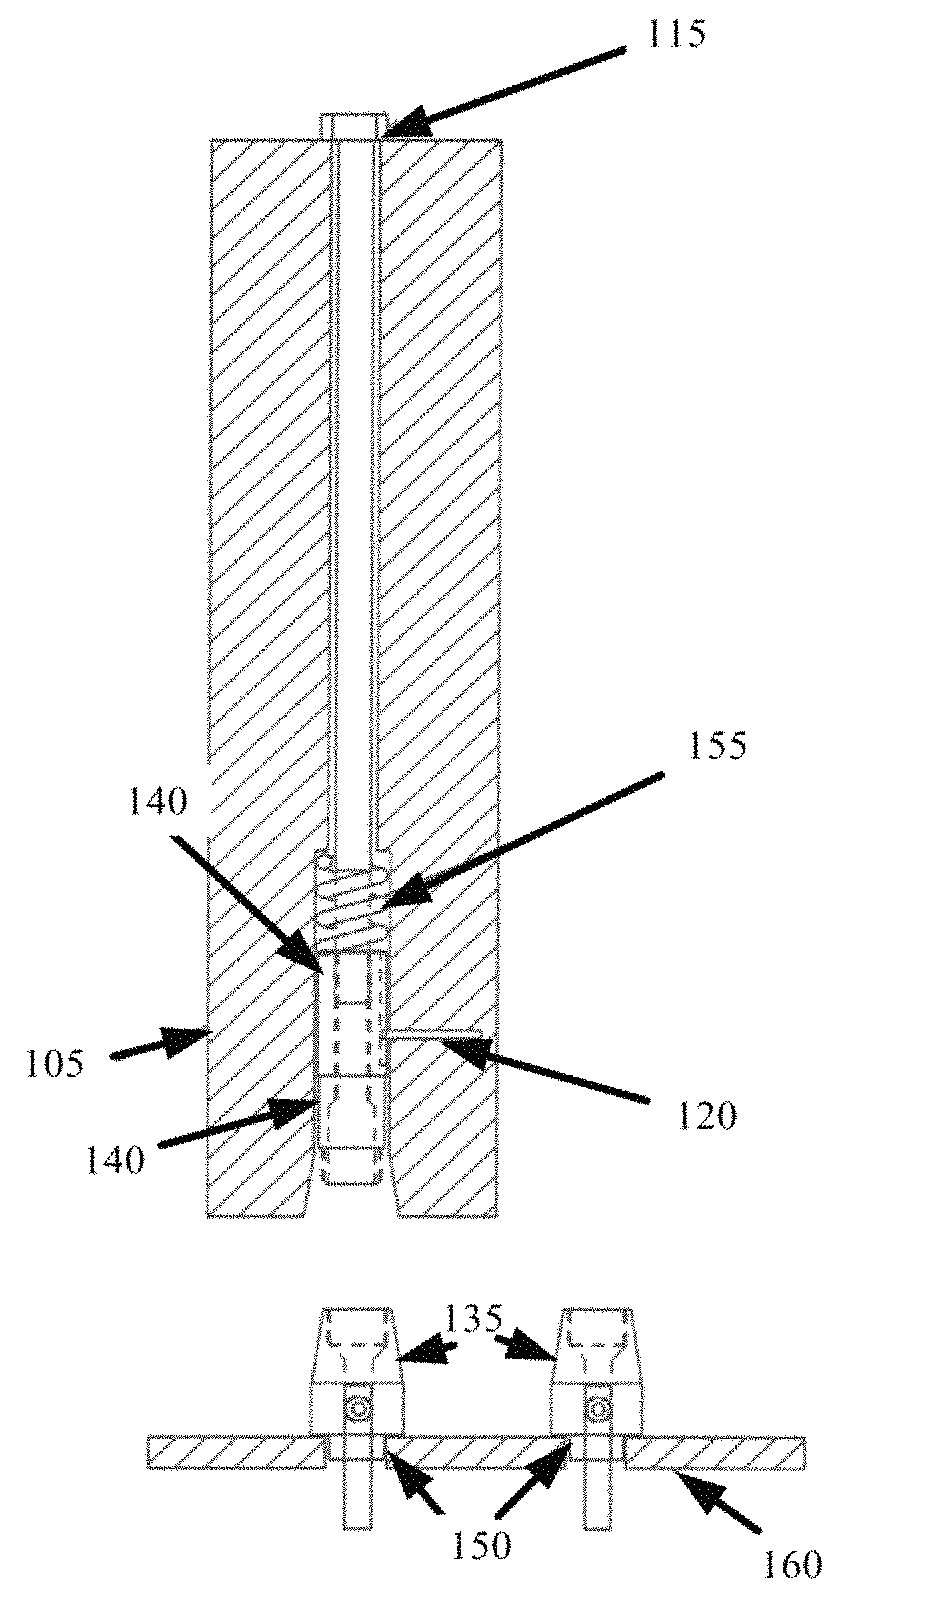 Apparatus and a system for automatic tool change by threading engagement for a CNC milling machine